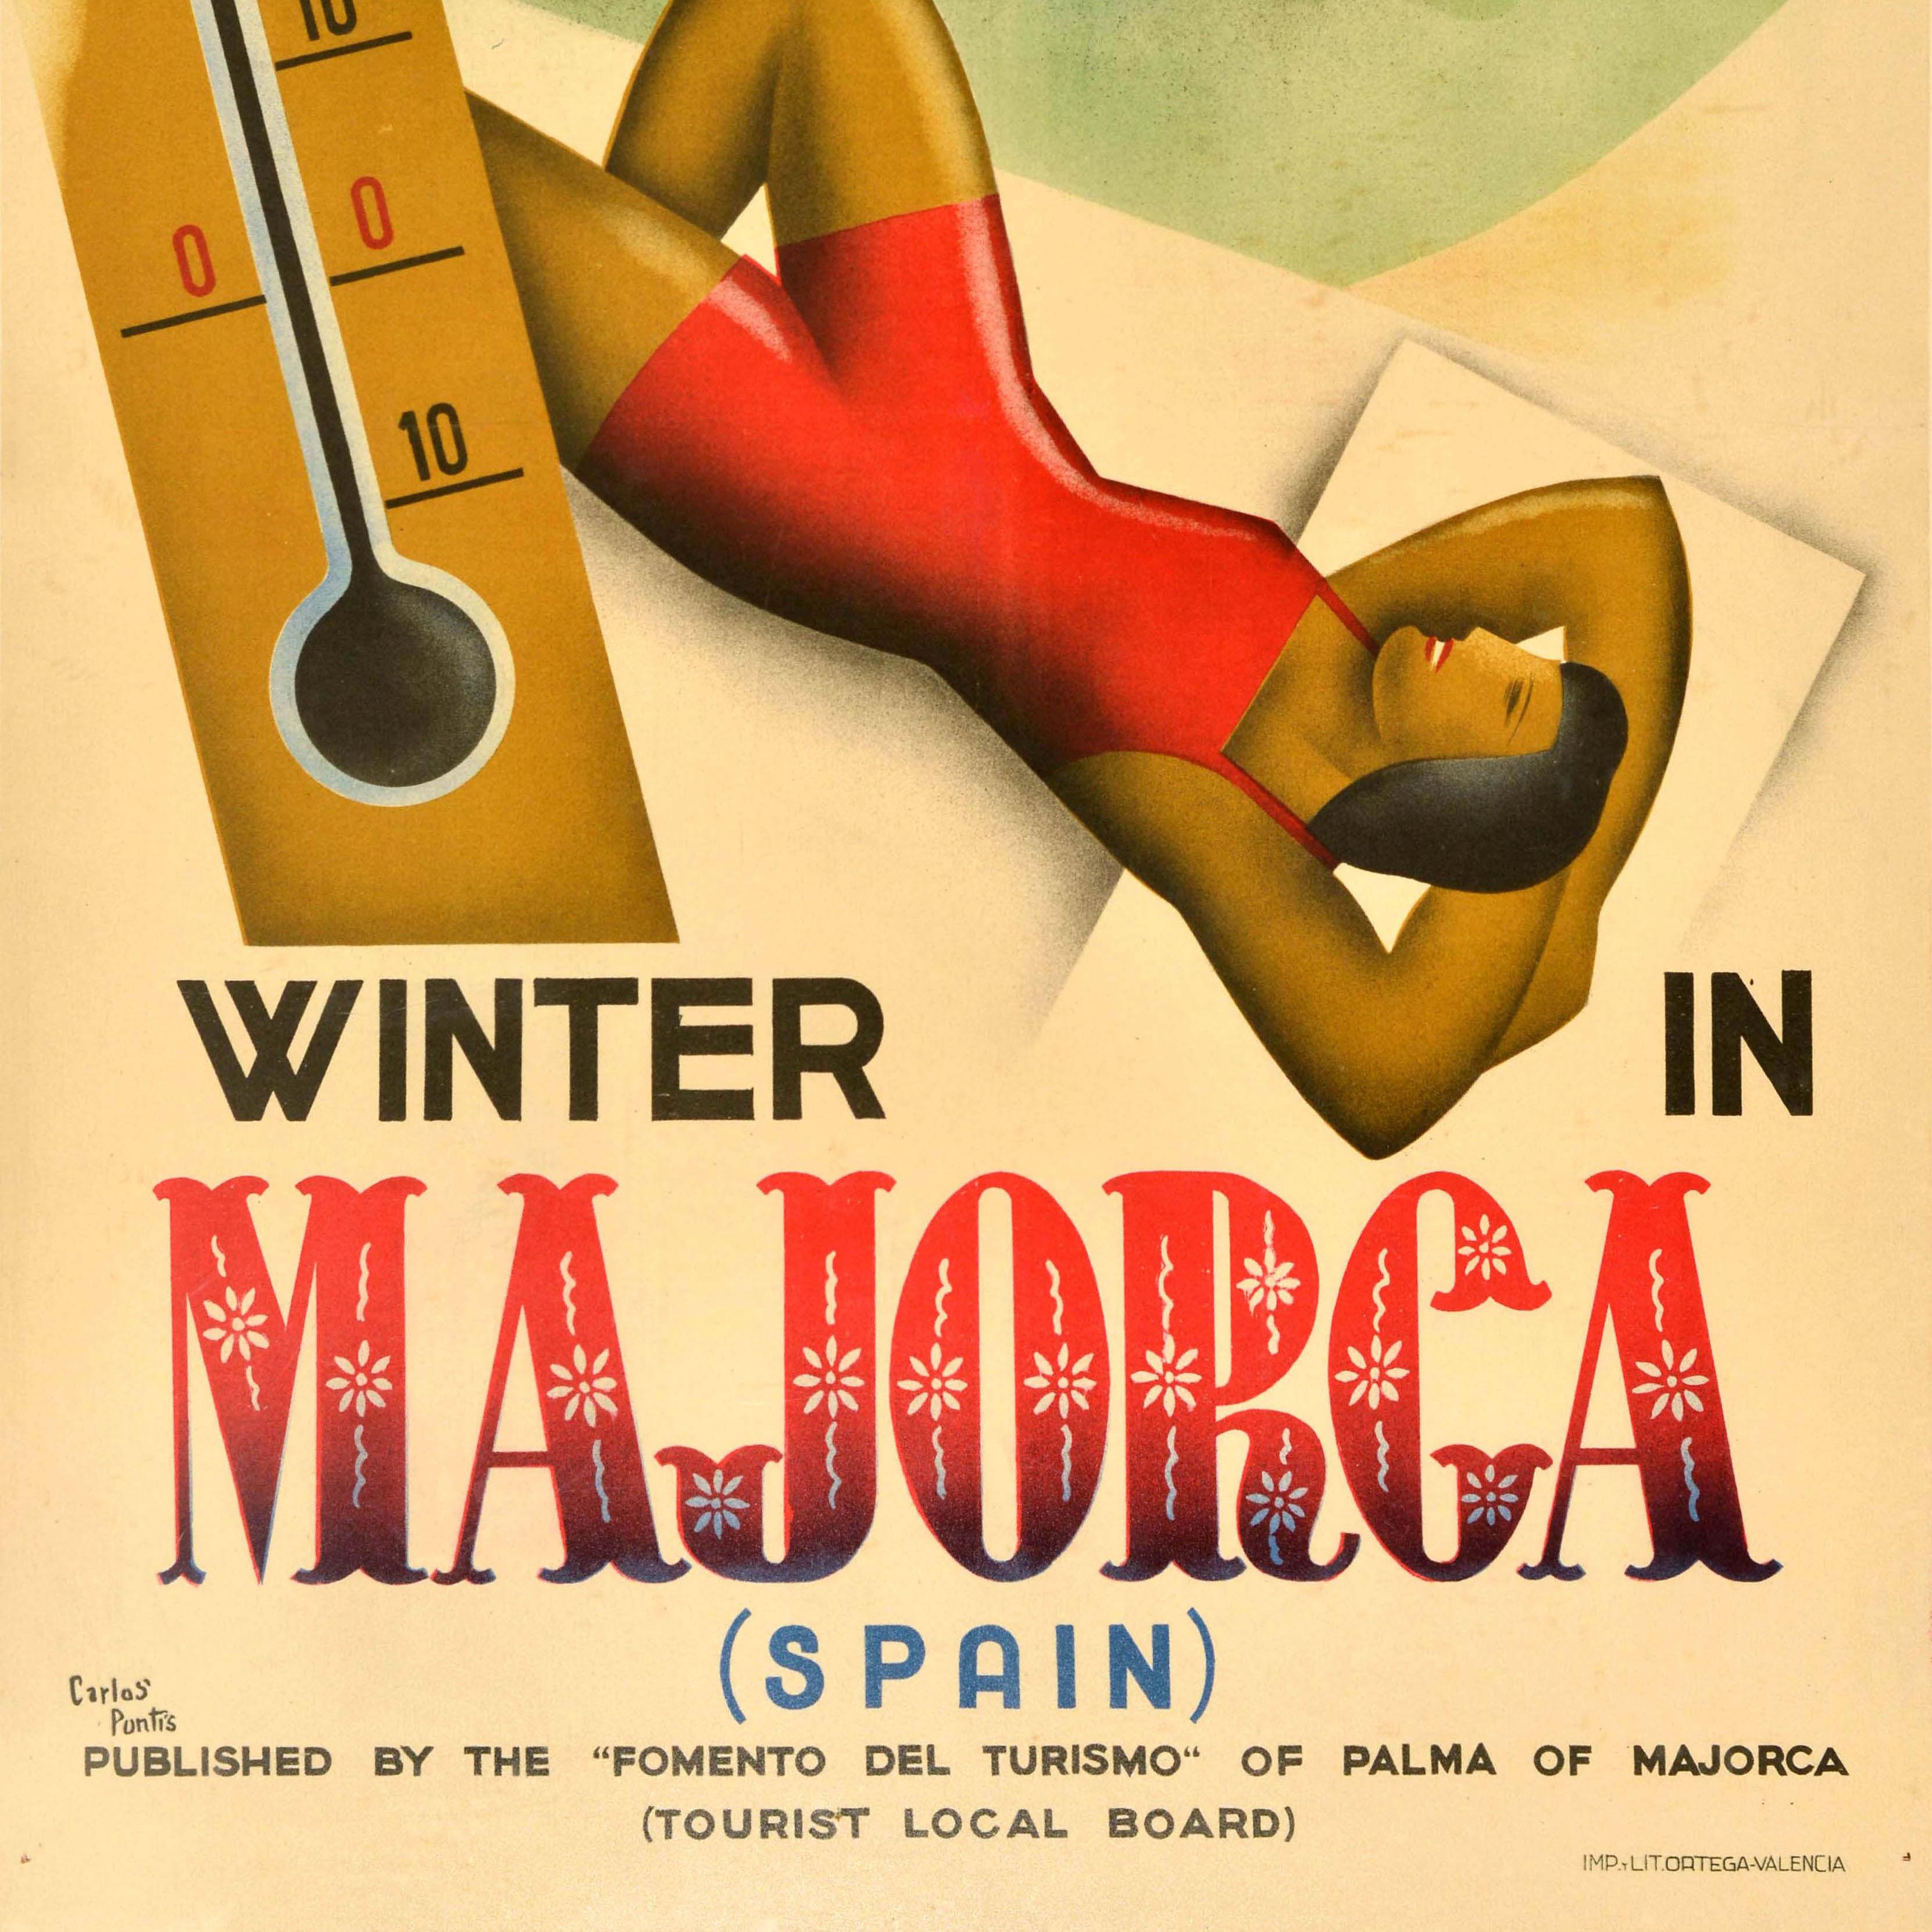 Original Vintage Travel Poster Winter In Majorca Spain Carlos Puntis Art Deco In Good Condition For Sale In London, GB